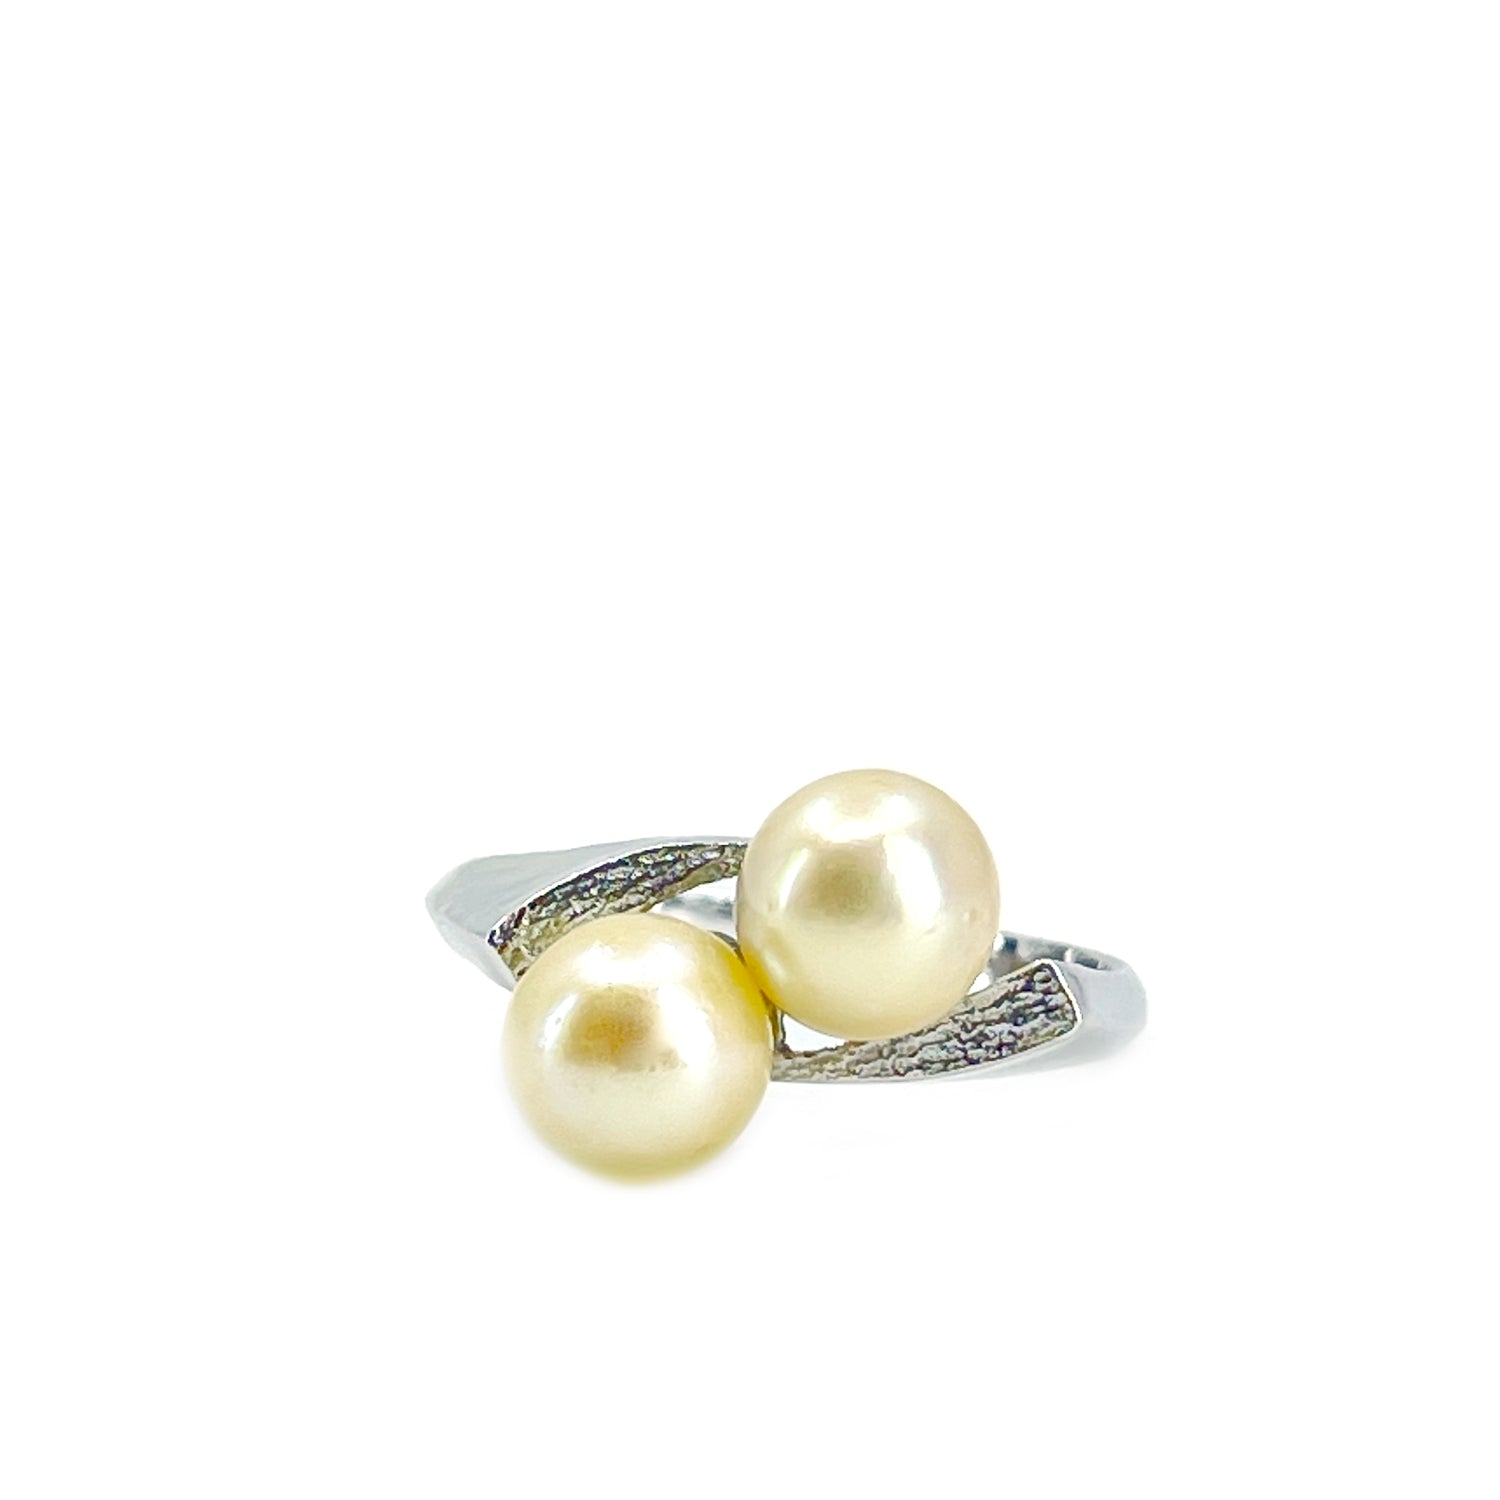 Bypass Japanese Golden Saltwater Cultured Akoya Pearl Ring- Sterling Silver Sz 8 1/2